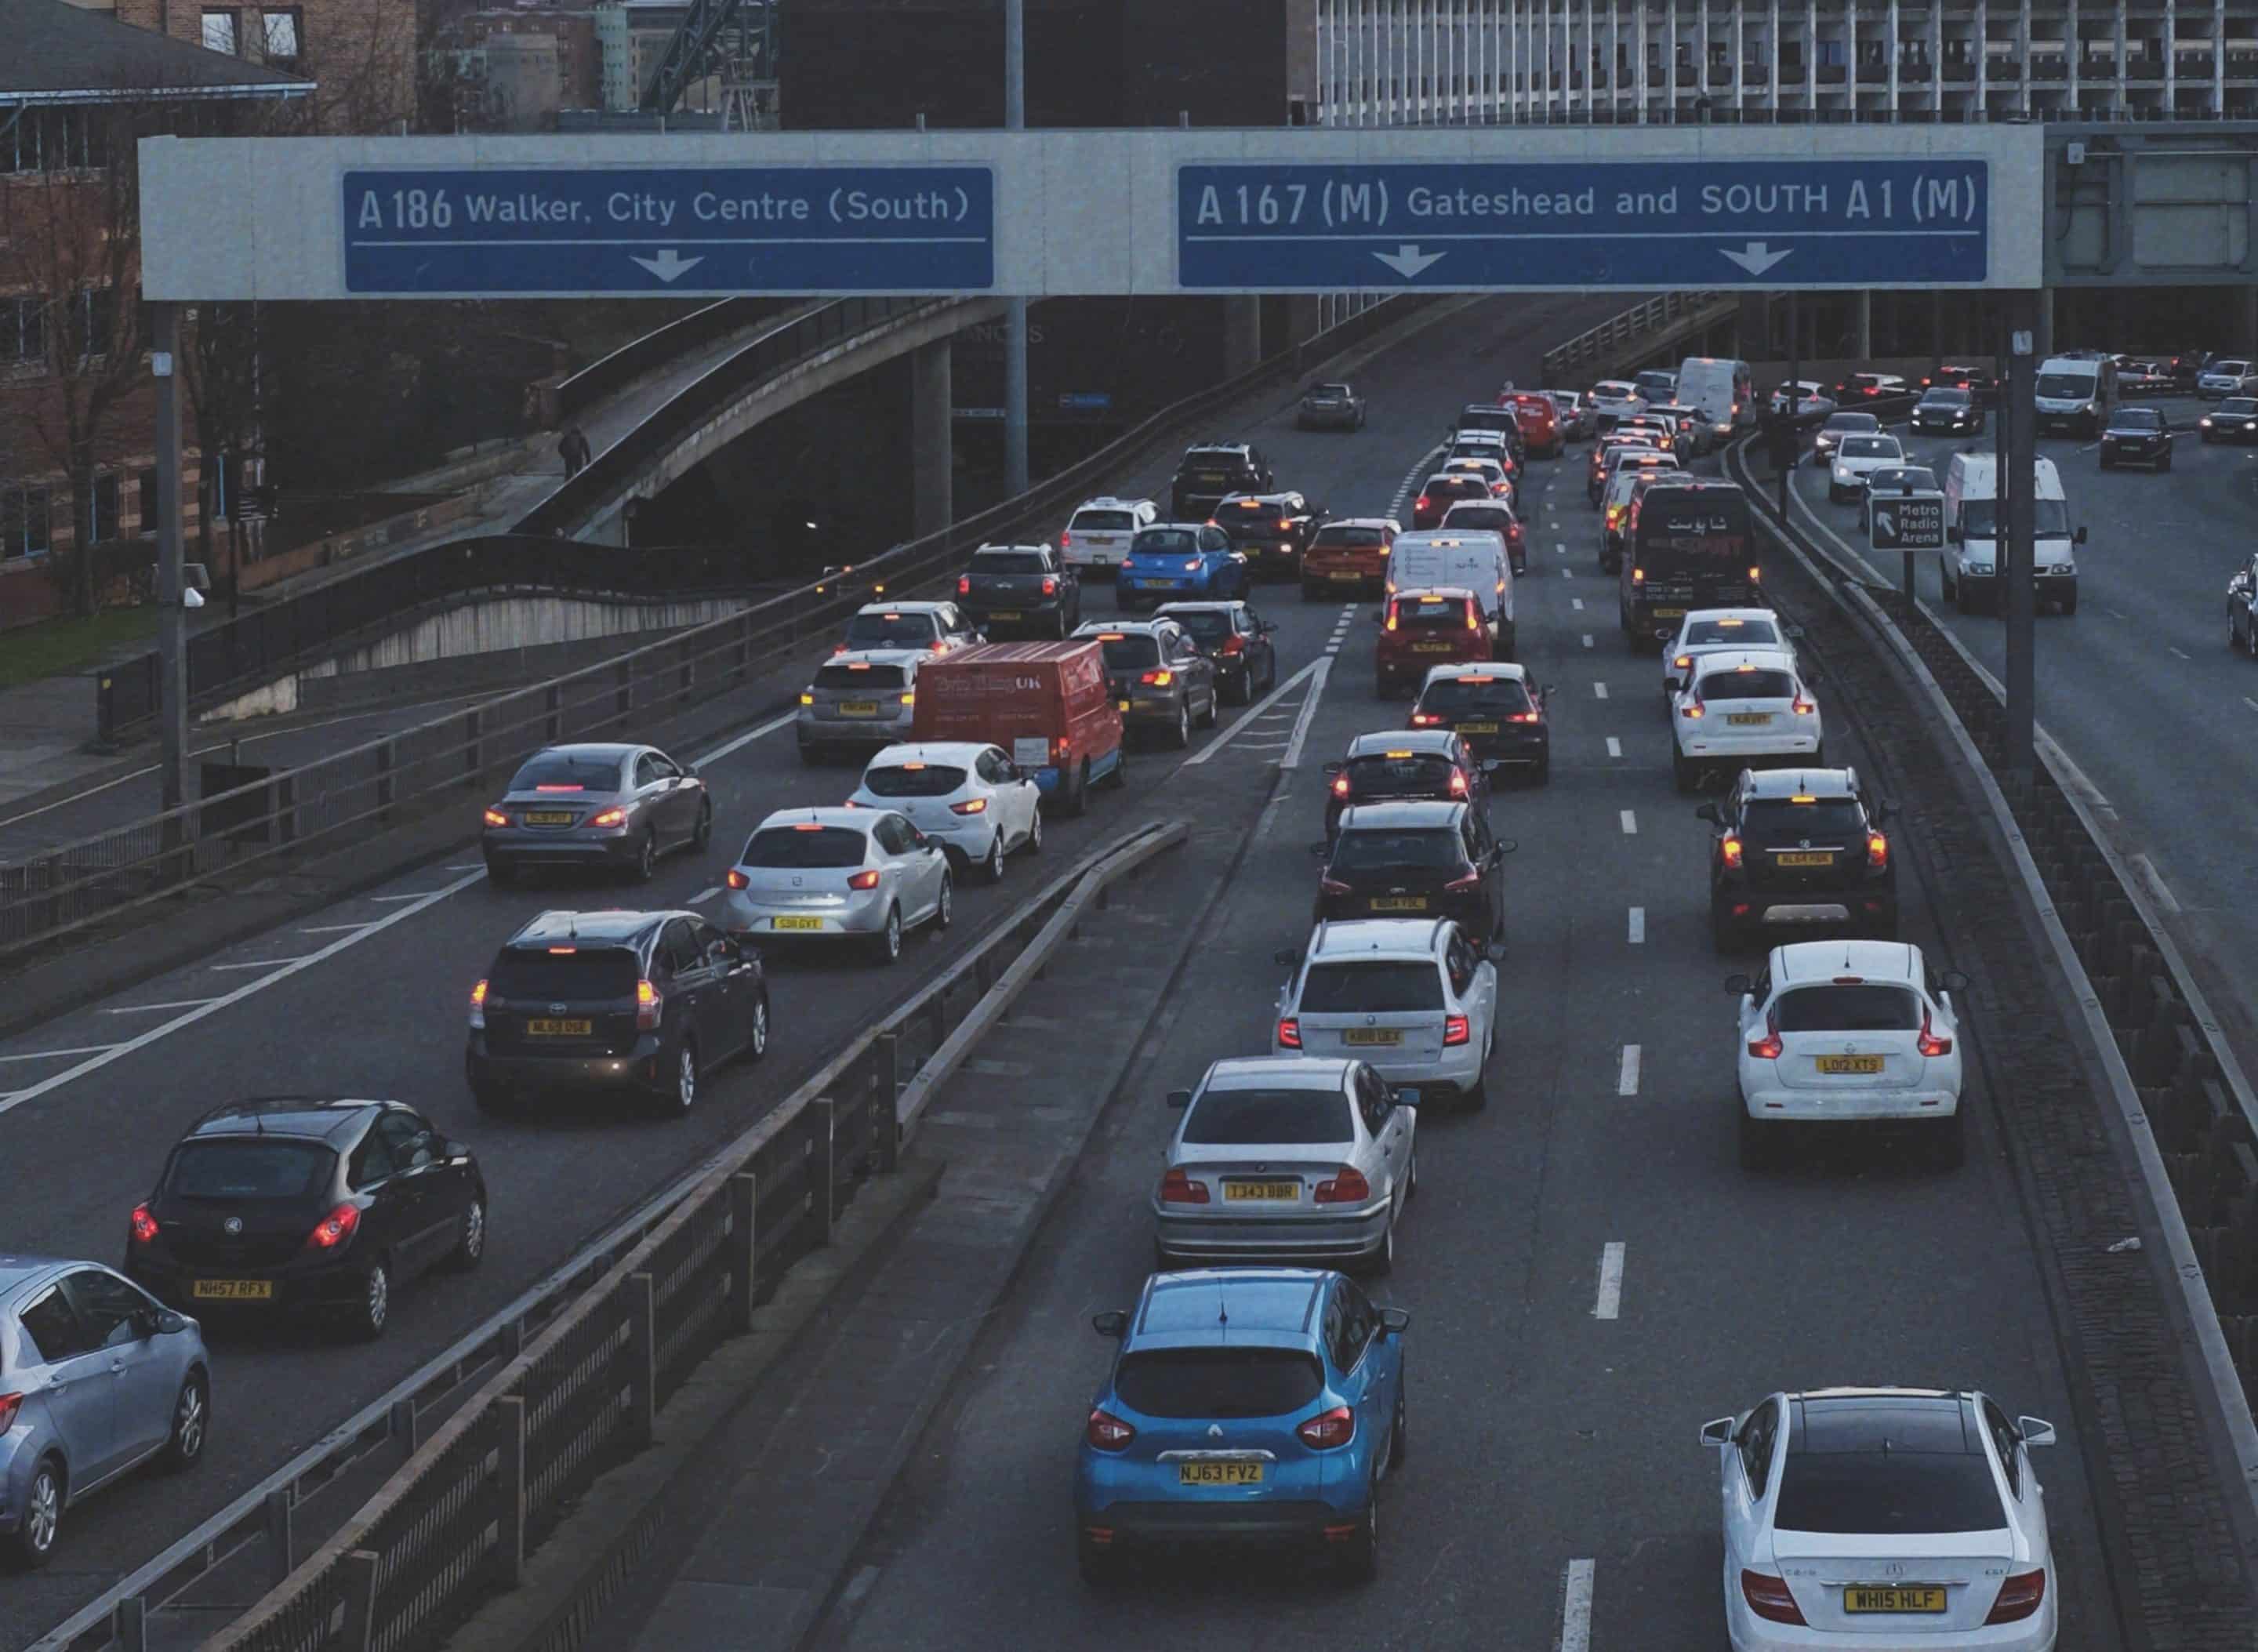 Traffic allowing to overtake on the left as permitted by road rules in the UK.